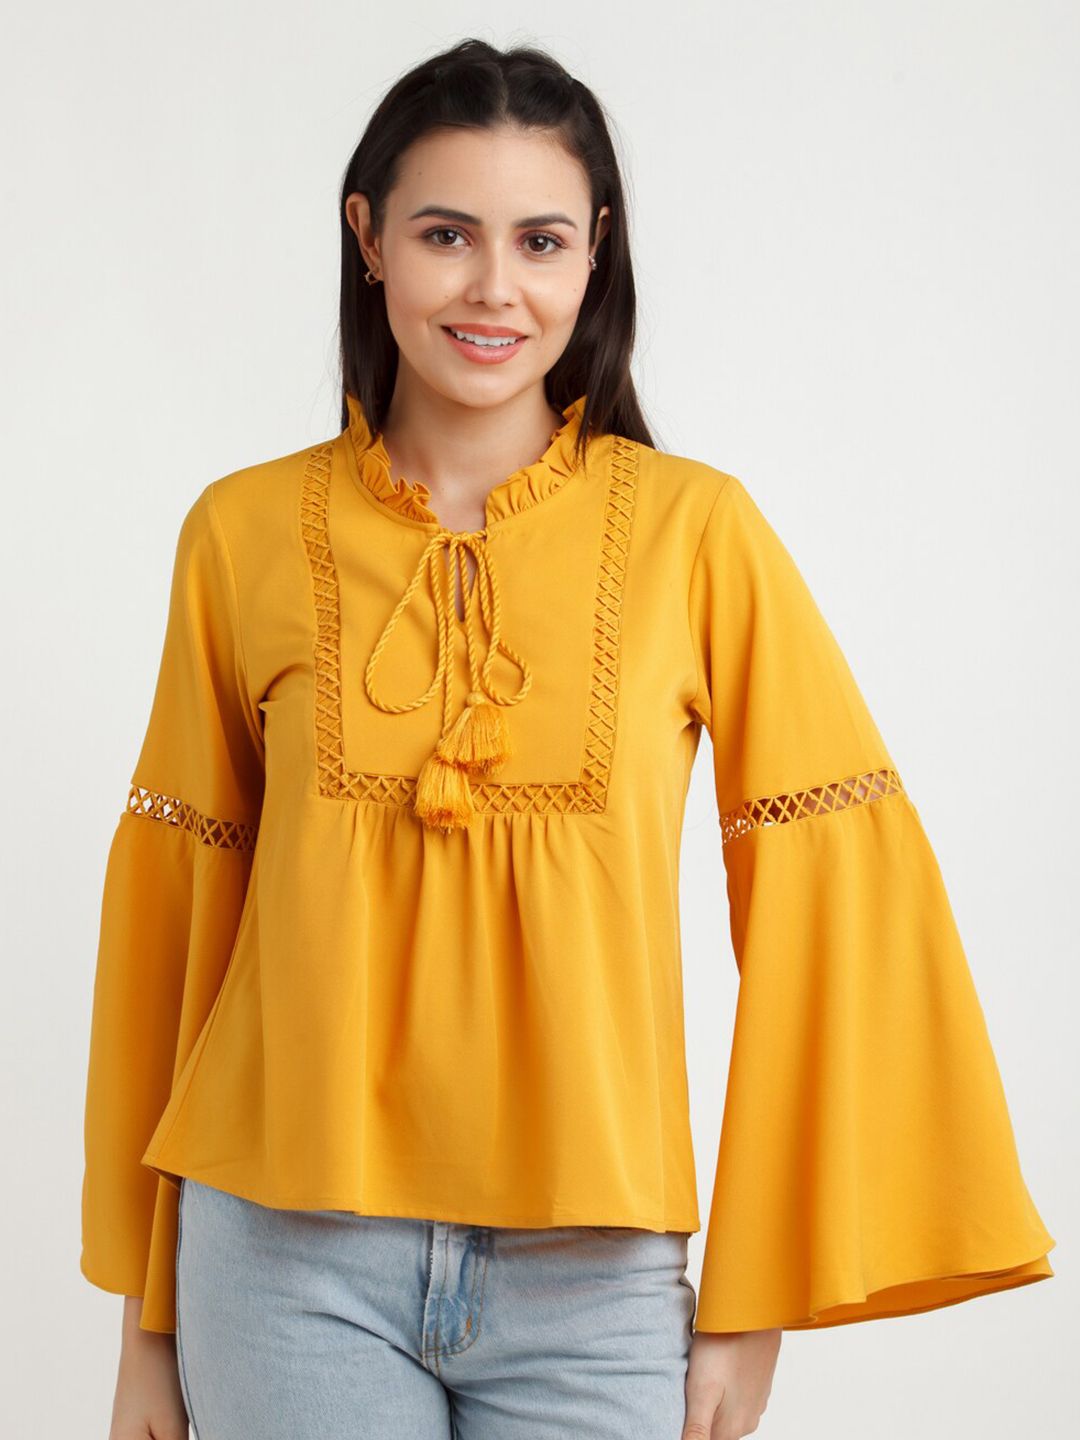 Zink London Yellow Tie-Up Neck Top Price in India